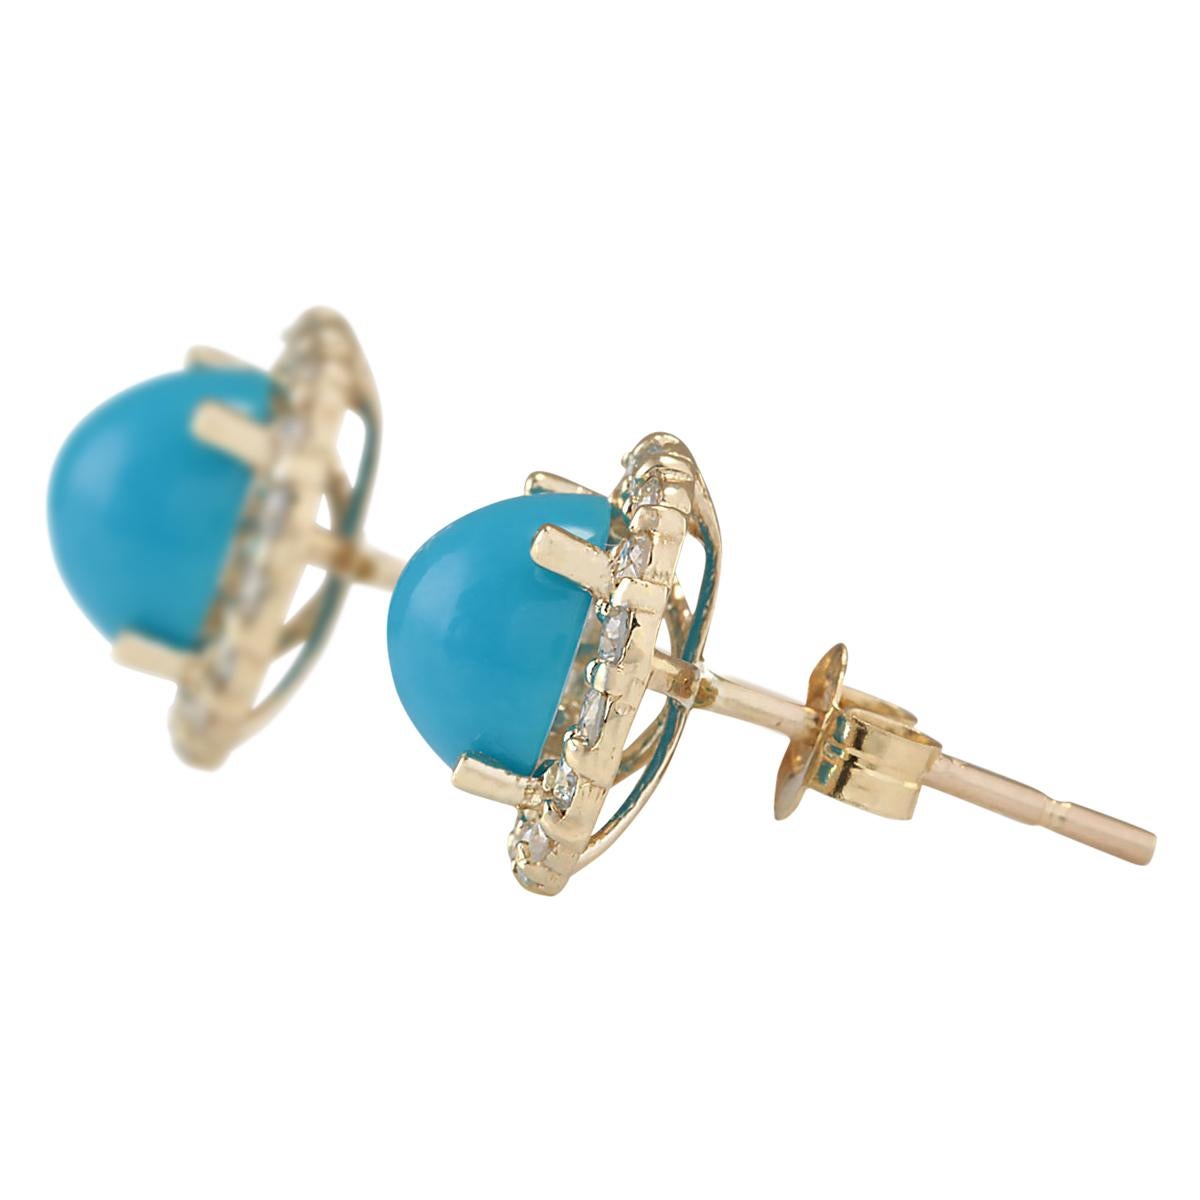 3.65 Carat Natural Turquoise 14 Karat Solid Yellow Gold Diamond Earrings
Stamped: 14K Yellow Gold
Total Earrings Weight: 2.0 Grams
Total Natural Turquoise Weight is 3.00 Carat (Measures: 7.00x7.00 mm)
Color: Blue
Total Natural Diamond Weight is 0.65